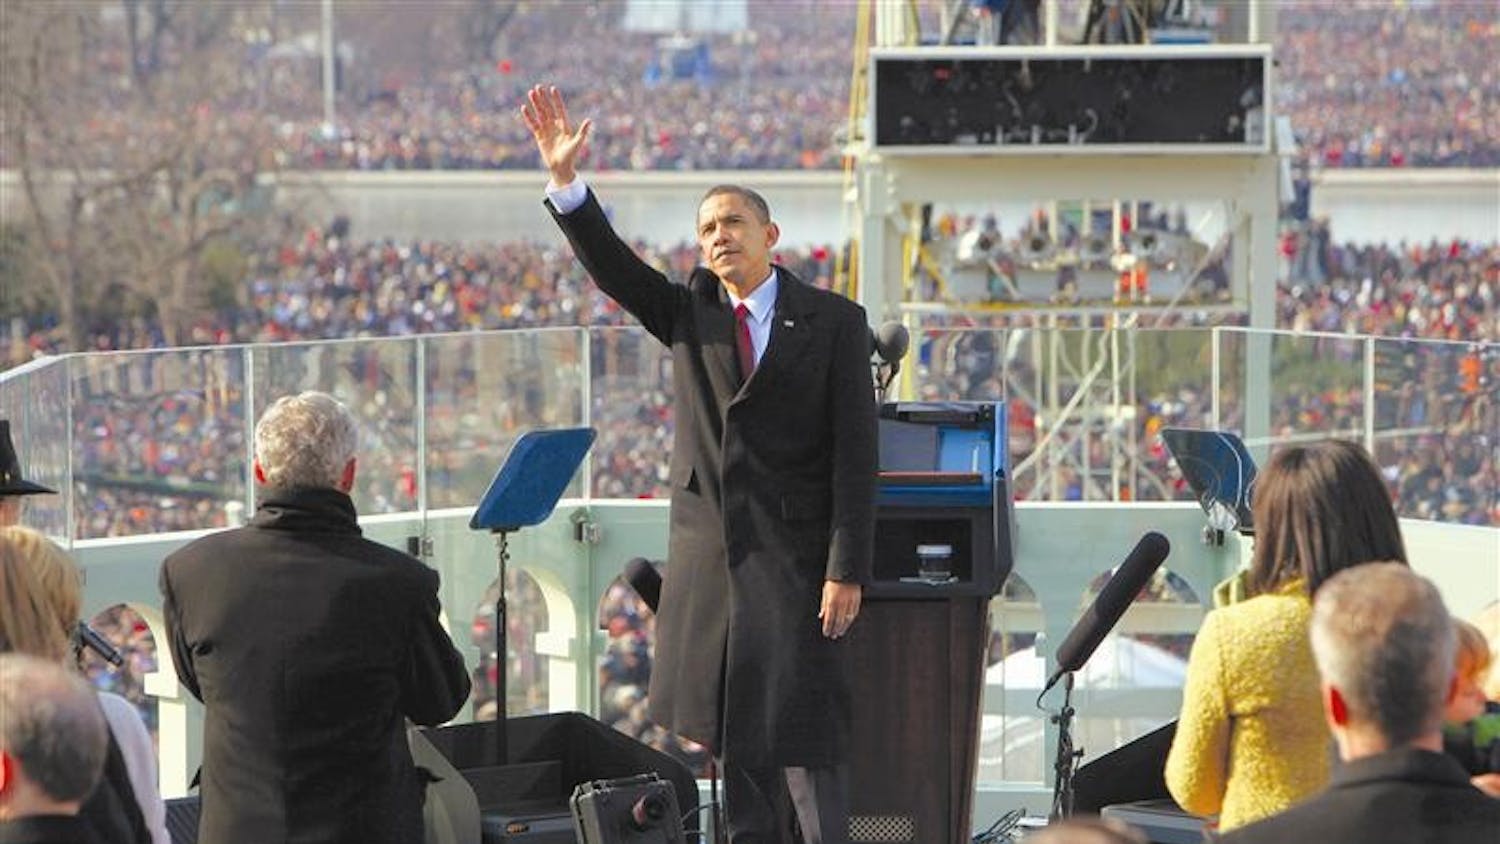 President Barack Obama waves to the crowd just after being sworn in as the 44th president at the U.S. Capitol on Tuesday in Washington.